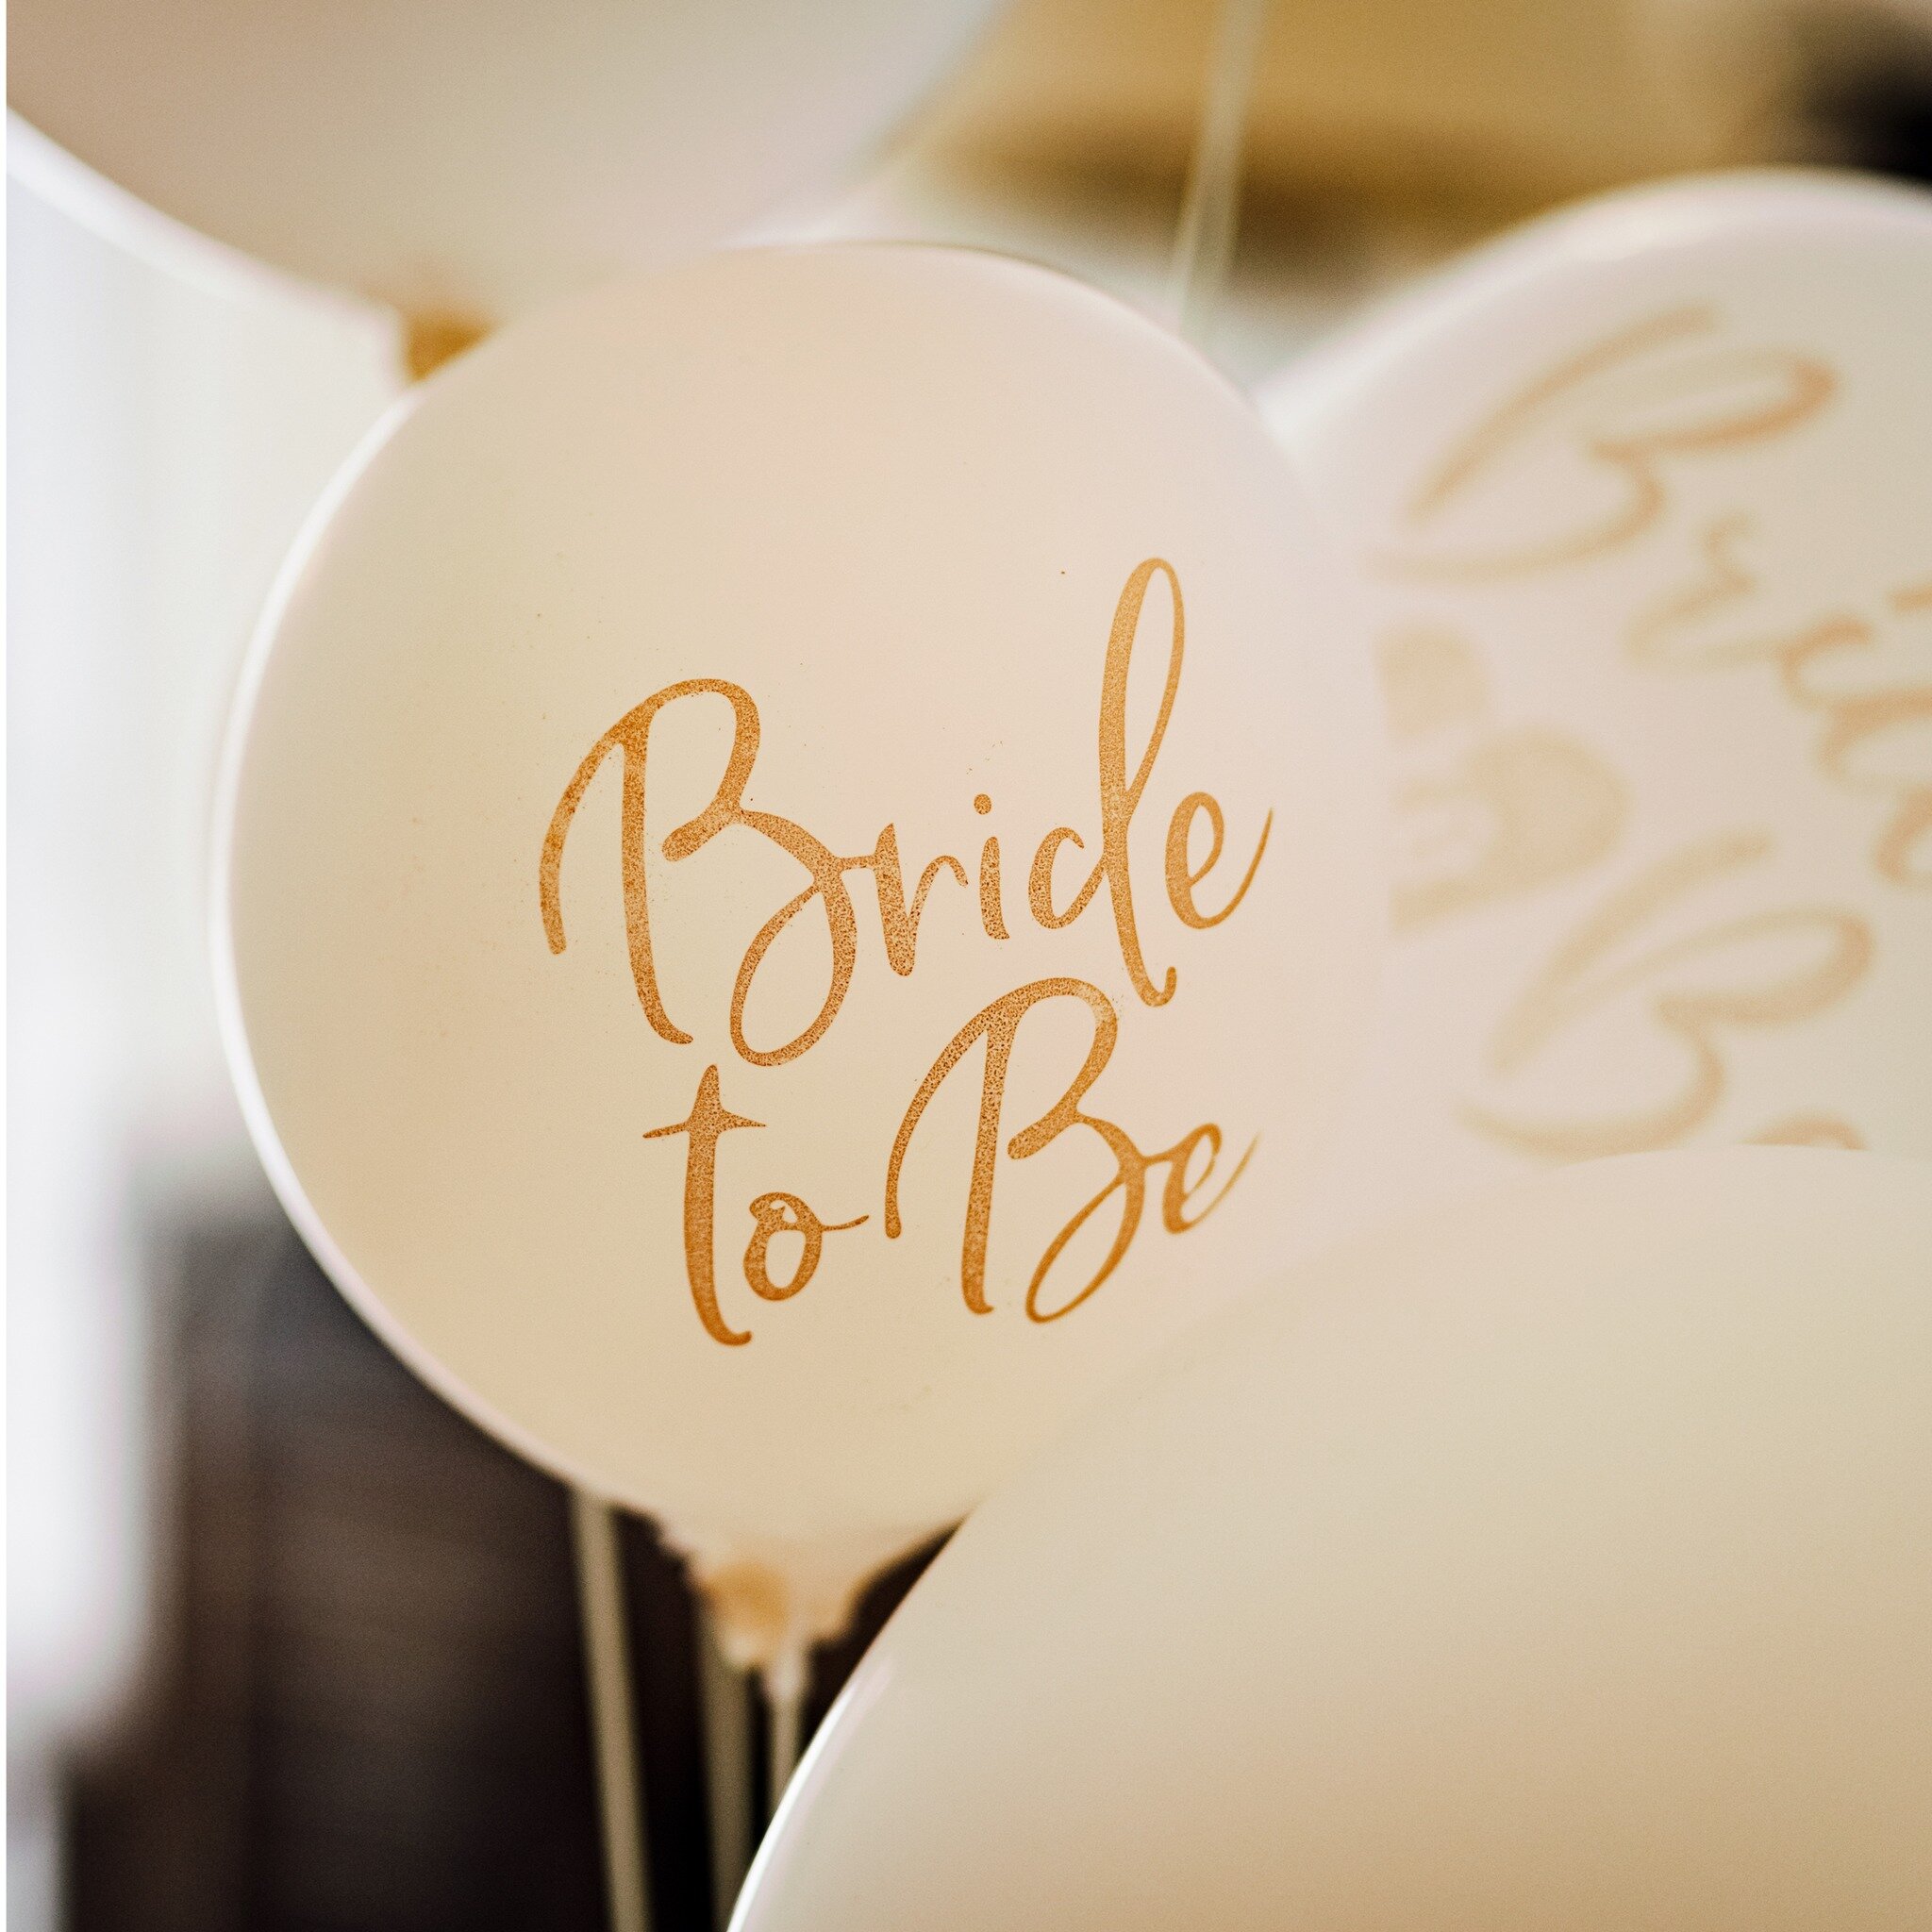 Hey beach babes and besties! 💍🌊 Let's celebrate the bride in style at Harbor Brook Hall! 🎉 Our beachfront venue is the ultimate backdrop for an unforgettable bridal shower packed with laughter, love, and endless memories. Get ready to pop the cham